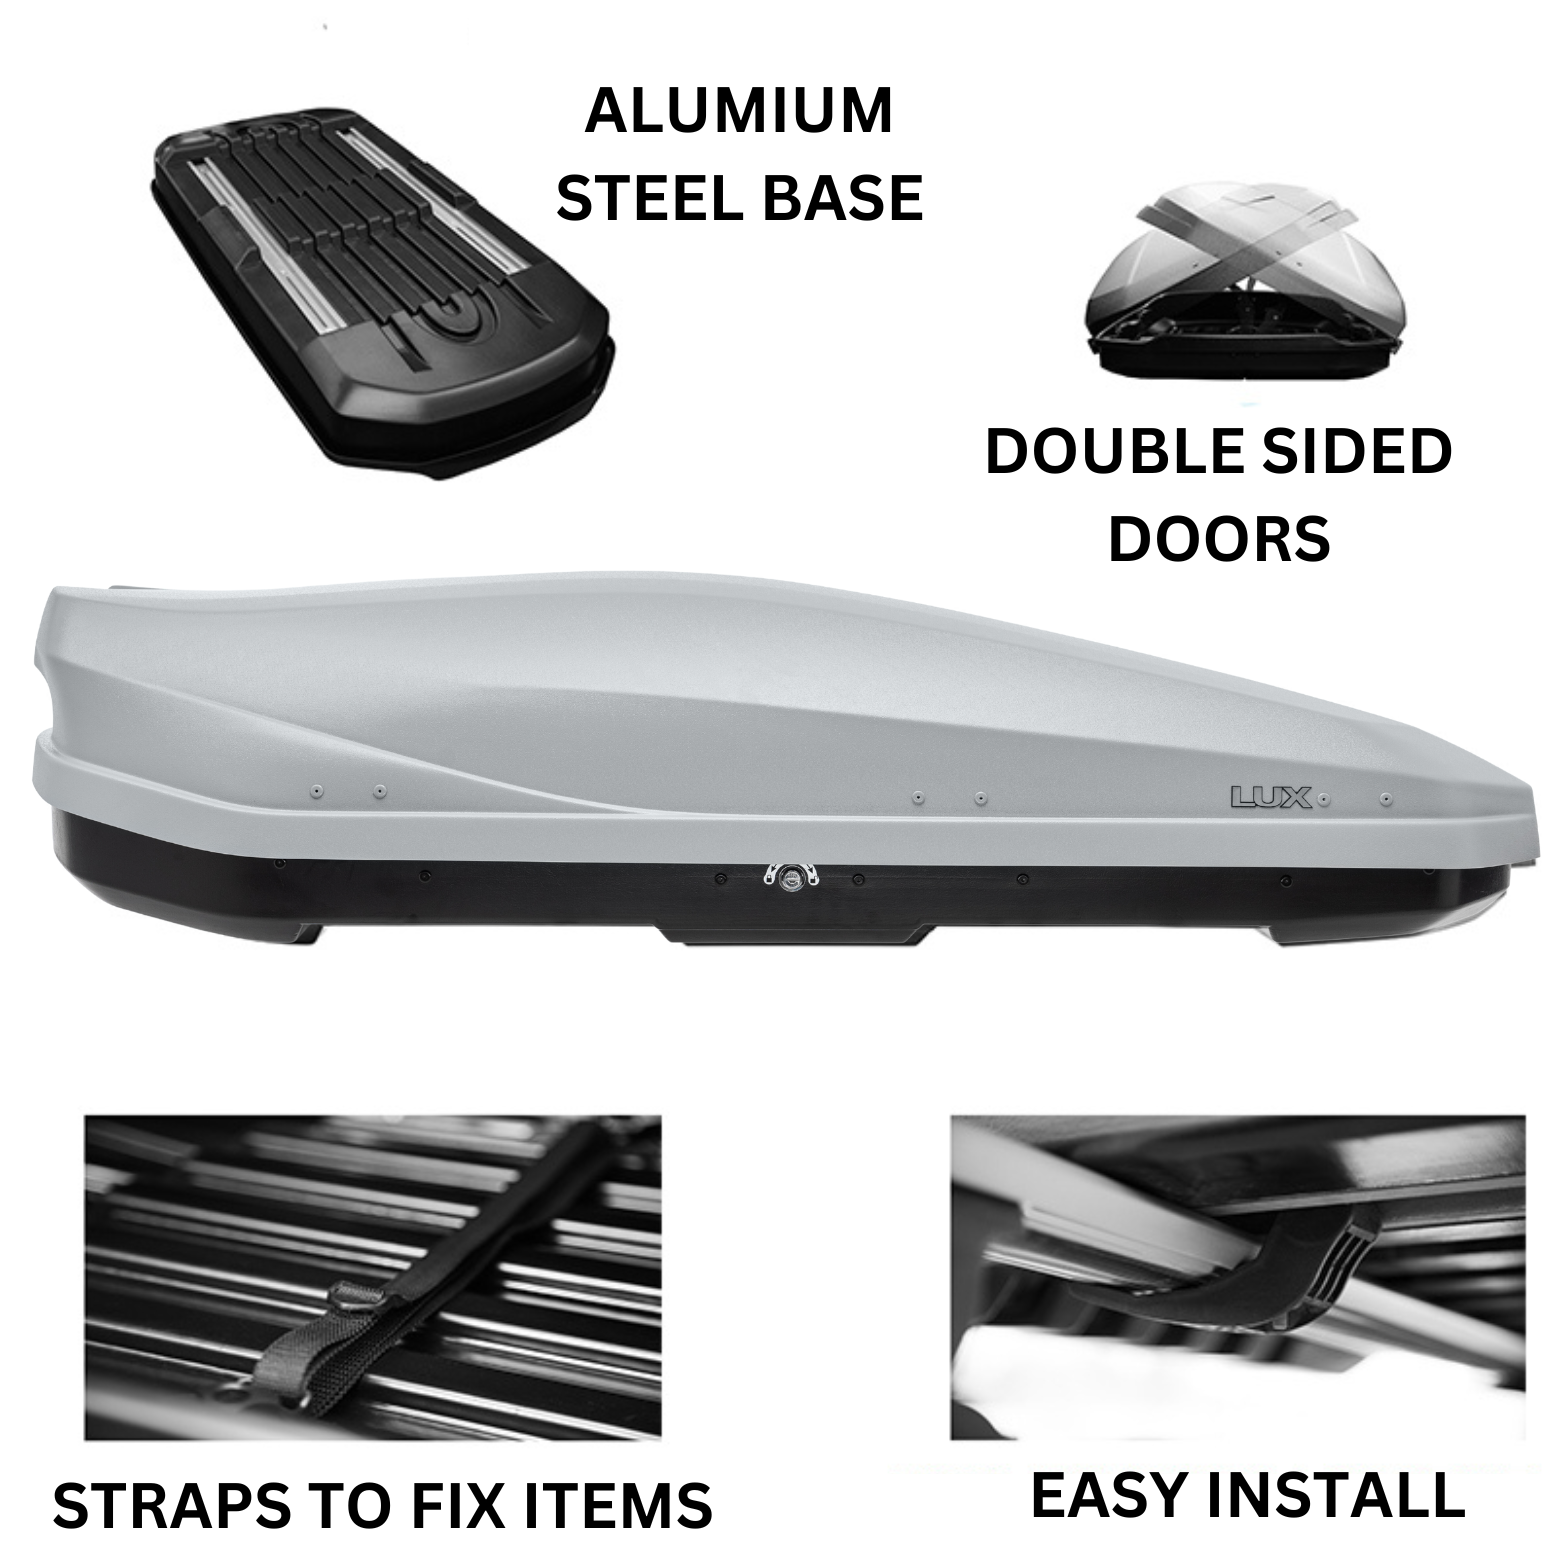 The Lux Luggage Box has a beautiful modern design that is highly aerodynamic, reliable